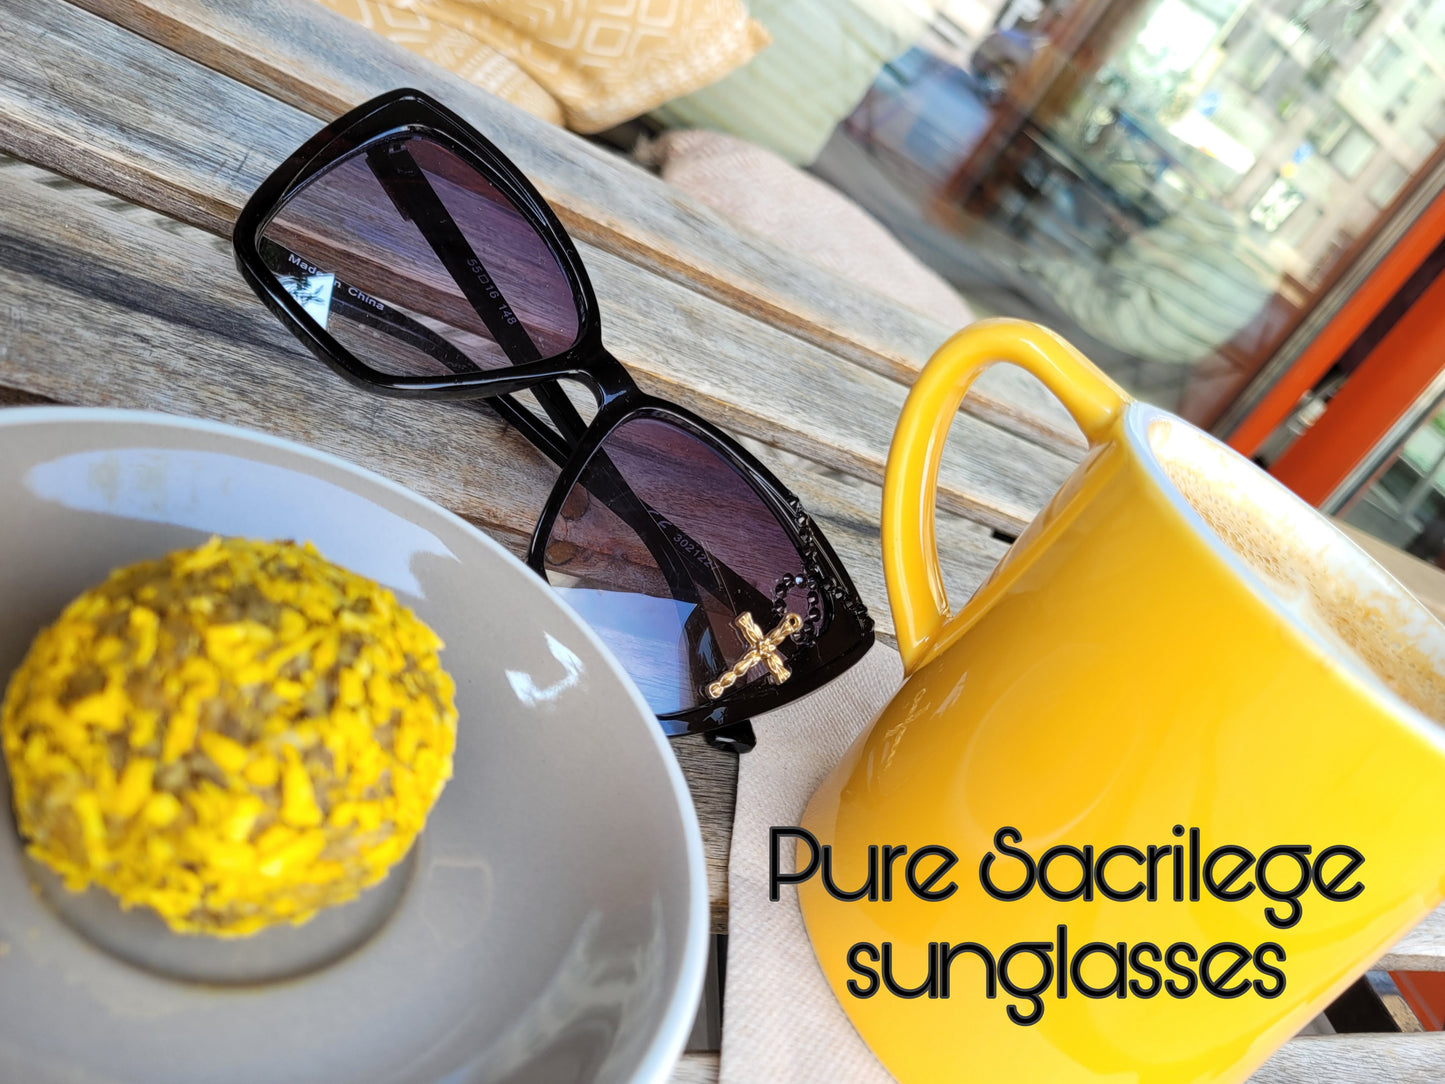 Sacrilegious Collection: The Pure Sacrilege sunglasses, limited edition model